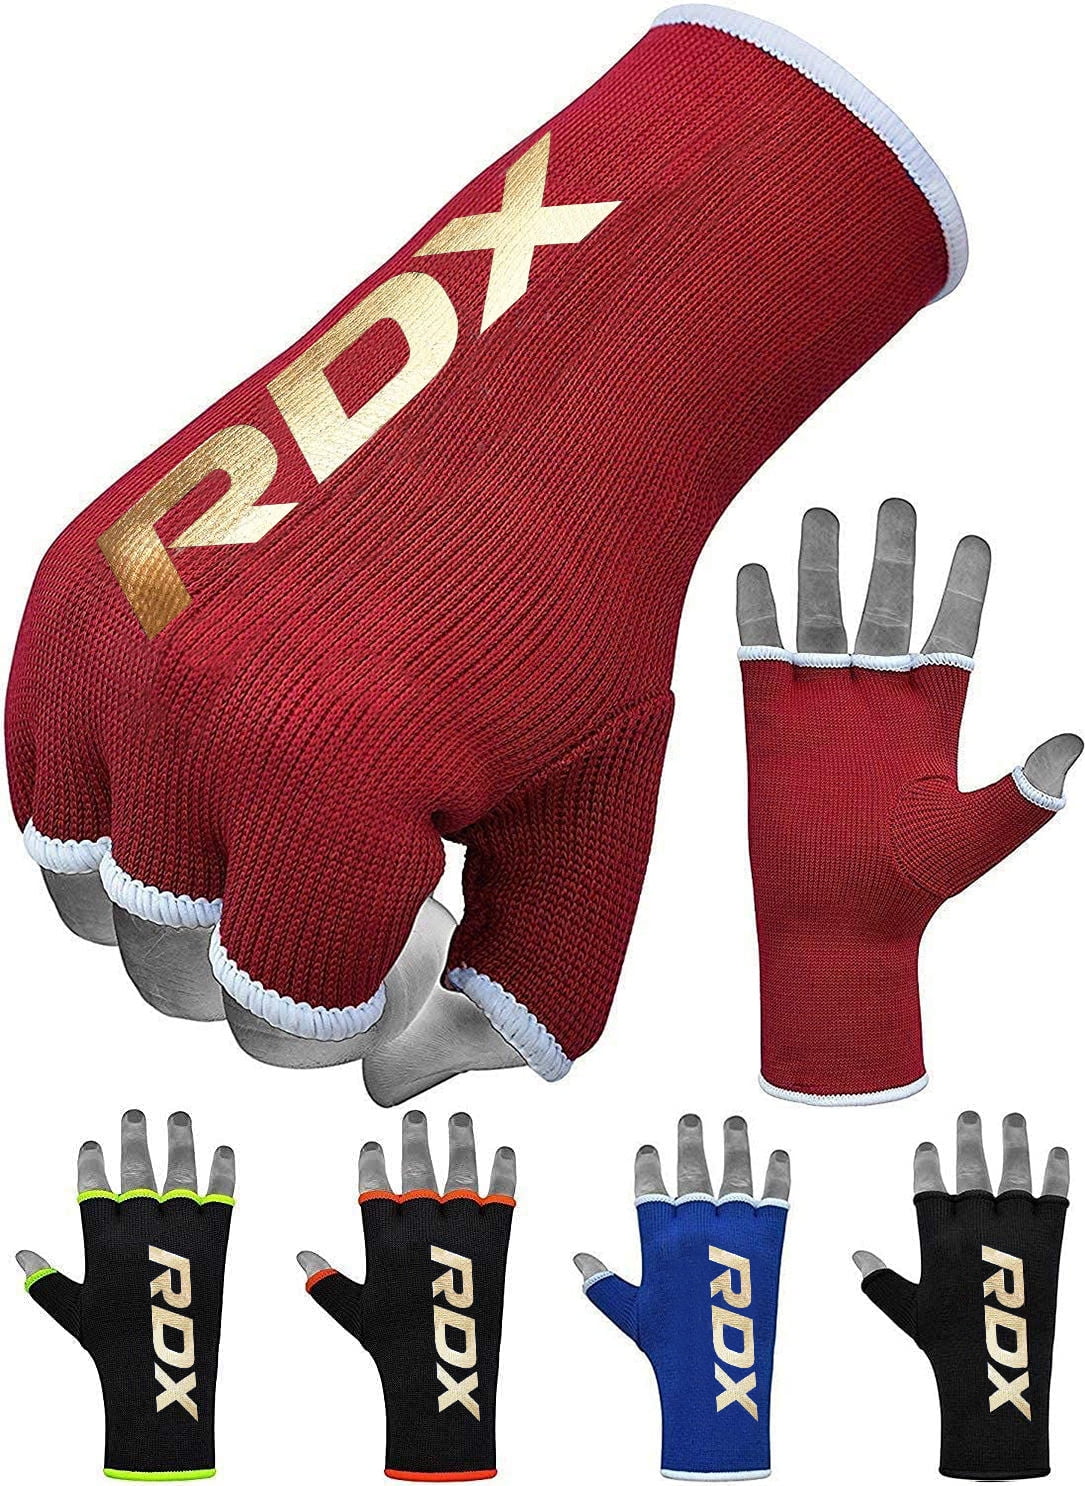 MRX New Boxing Fist Hand Inner Gloves Bandages MMA Muay Thai Protective Wraps 